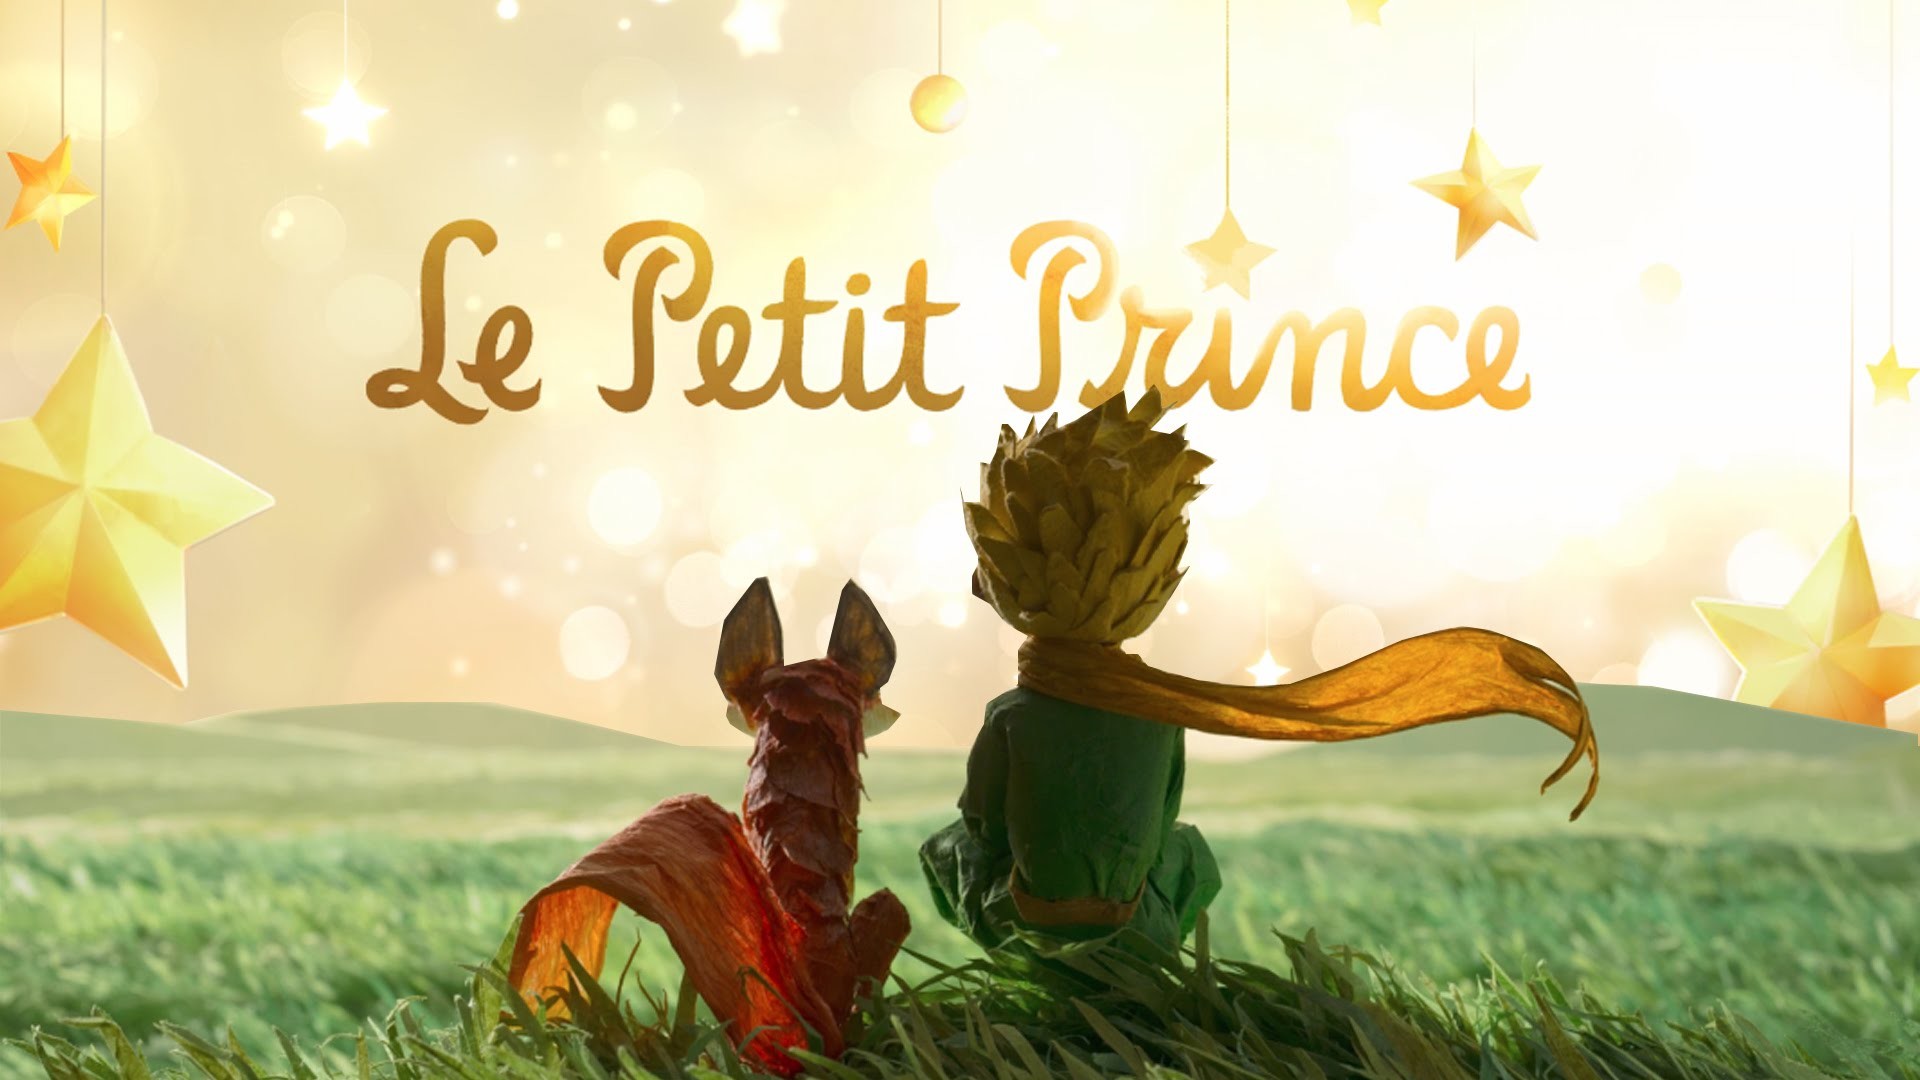 Little Prince Images